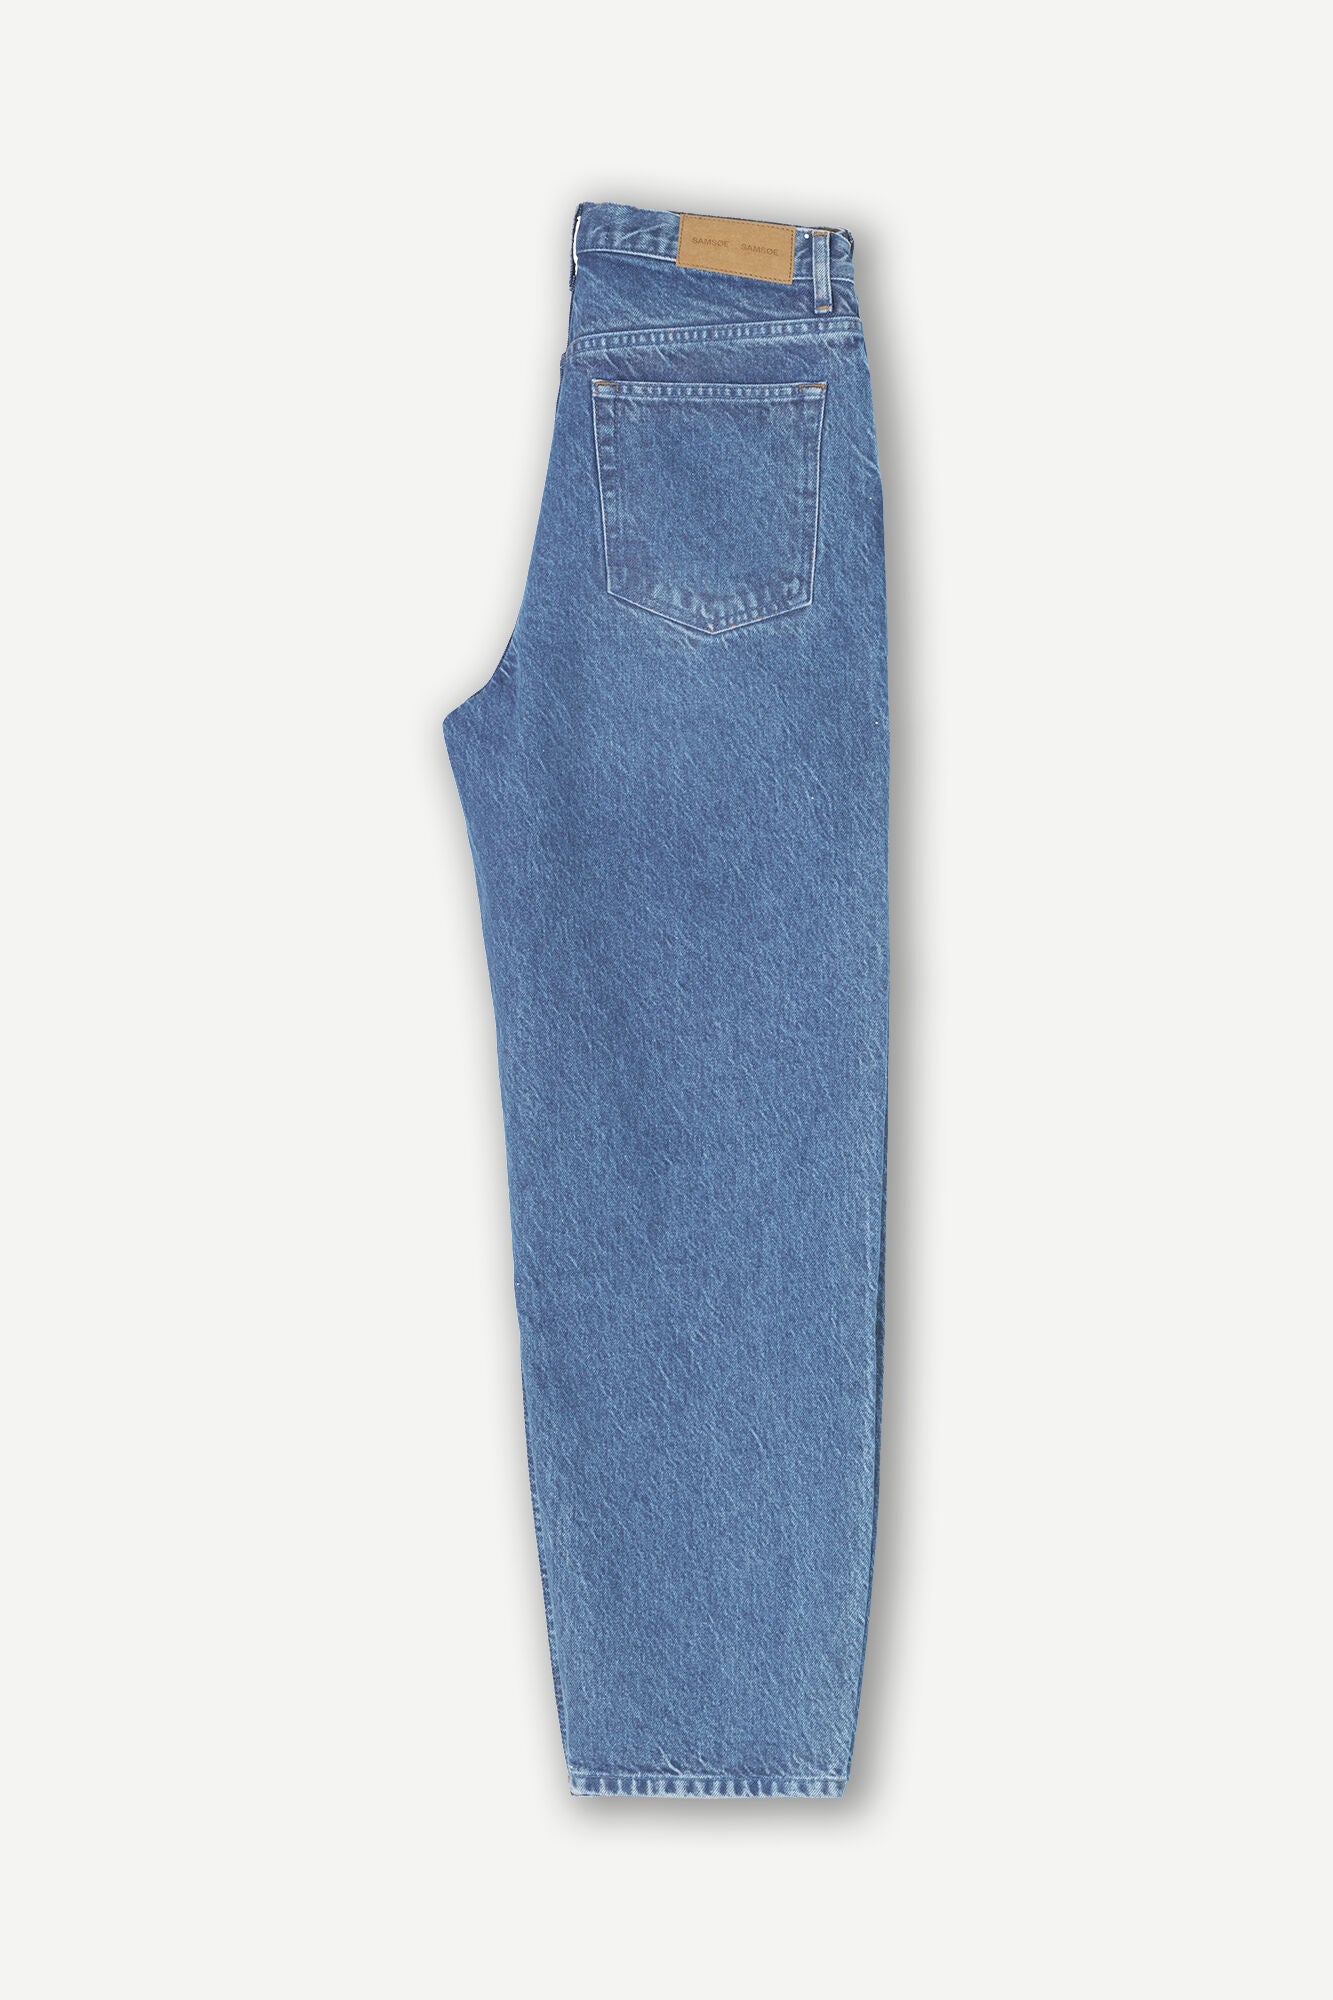 DAD JEANS IN BLUE WASH